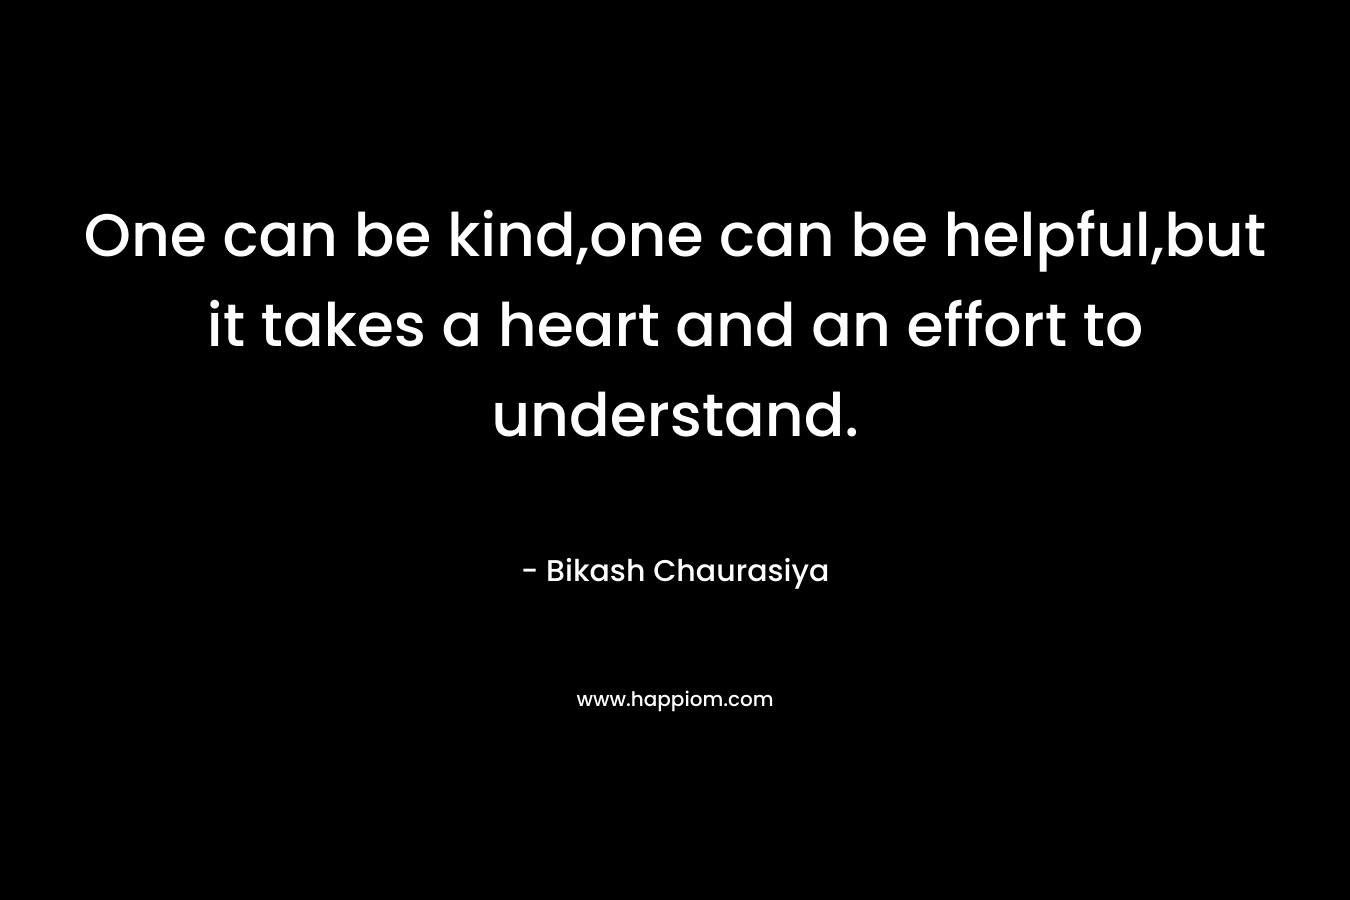 One can be kind,one can be helpful,but it takes a heart and an effort to understand.